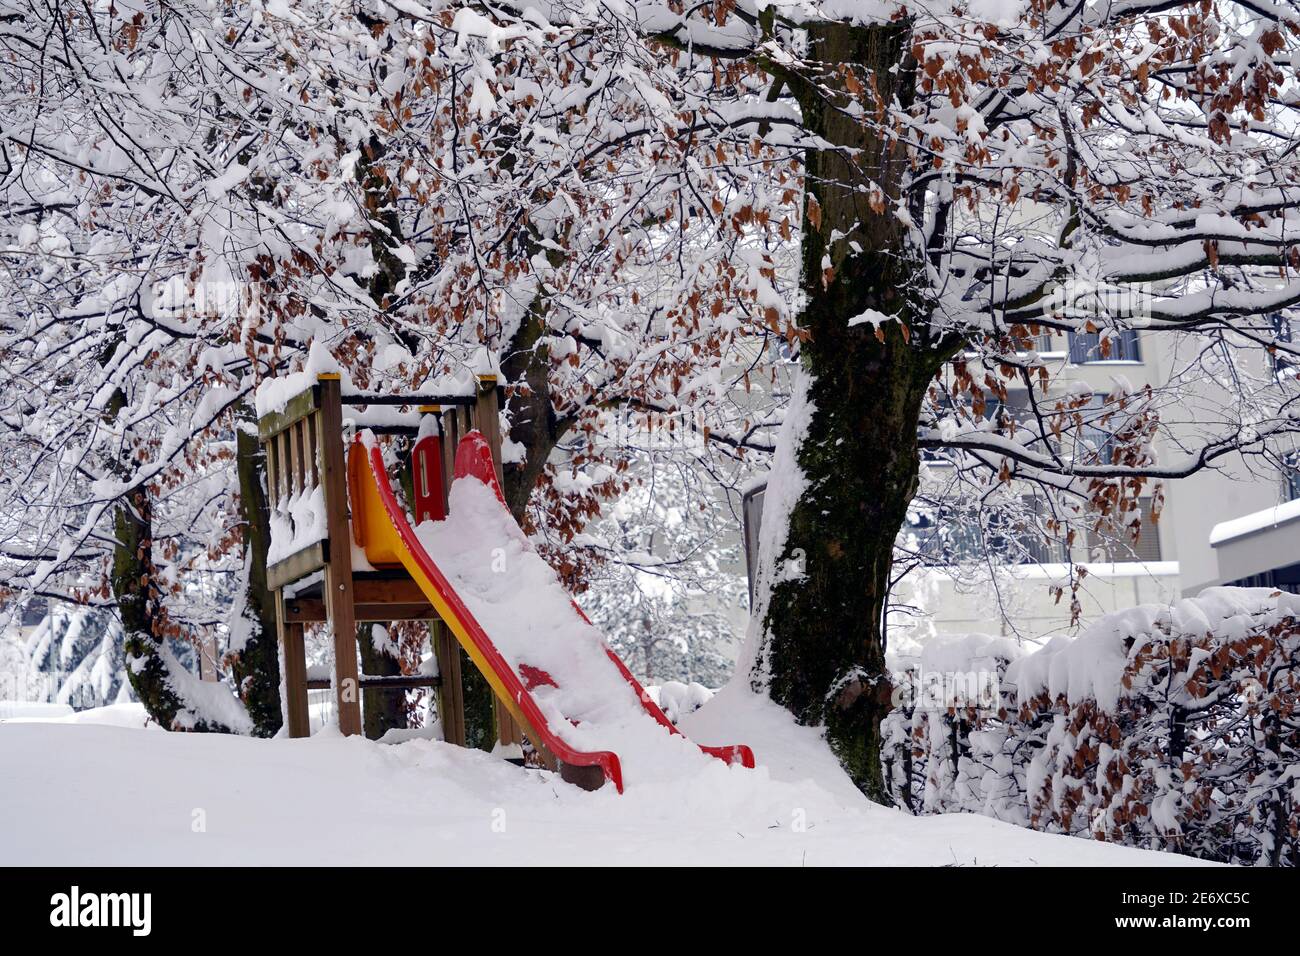 Garden in winter with a slide for children covered with snow. The branches of the trees around are under the snow as well. Example of heavy snowfall. Stock Photo